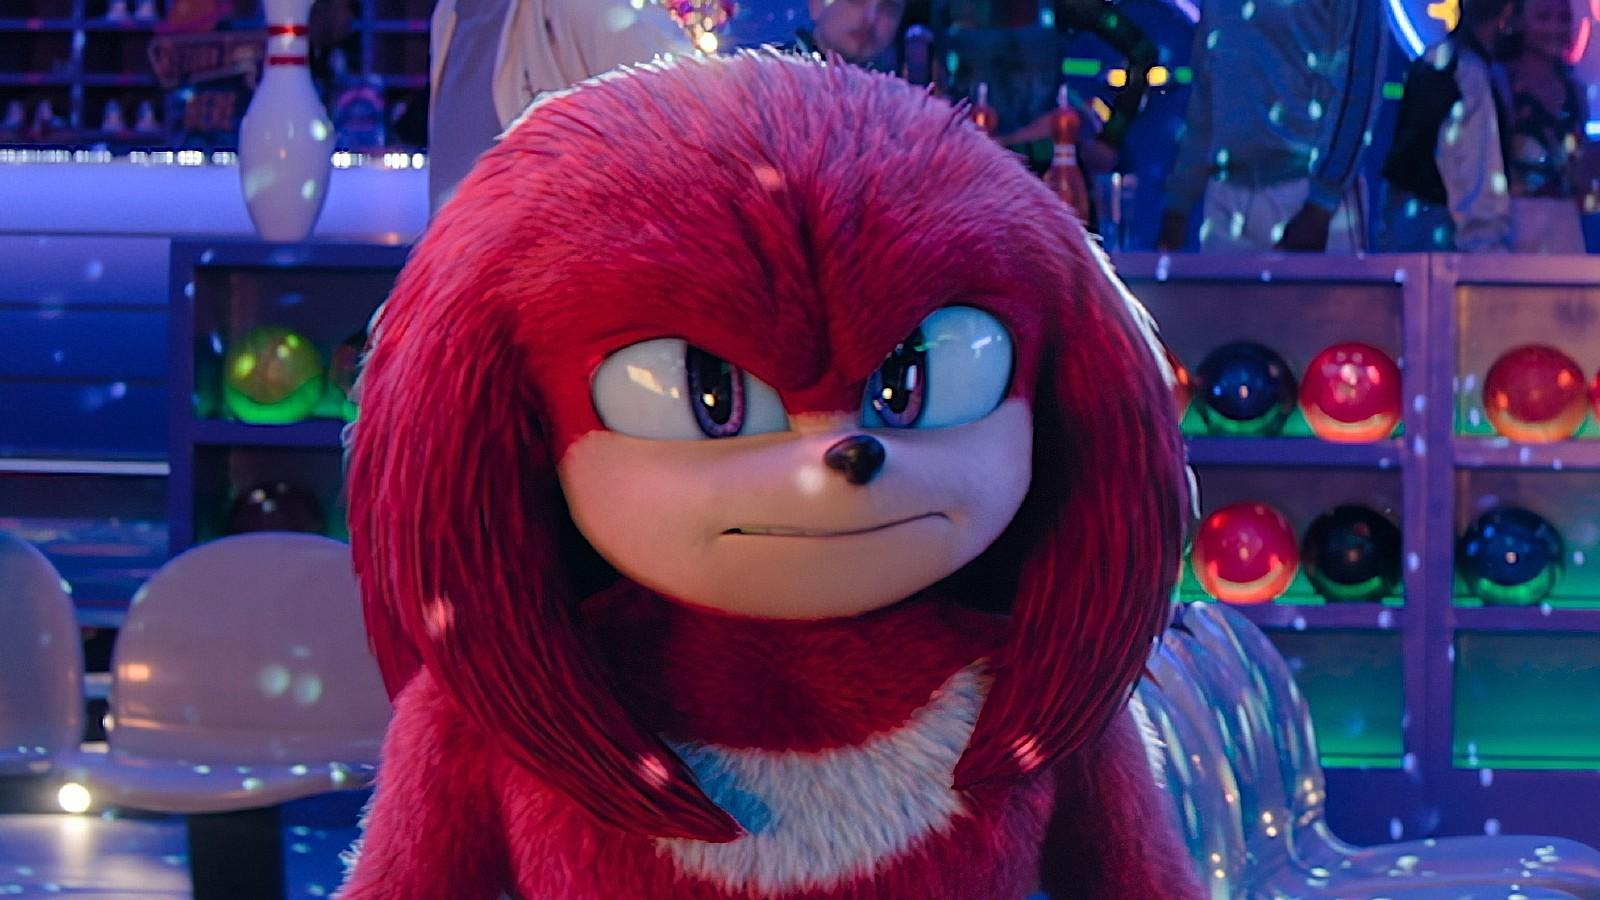 Knuckles in the Paramount Plus series